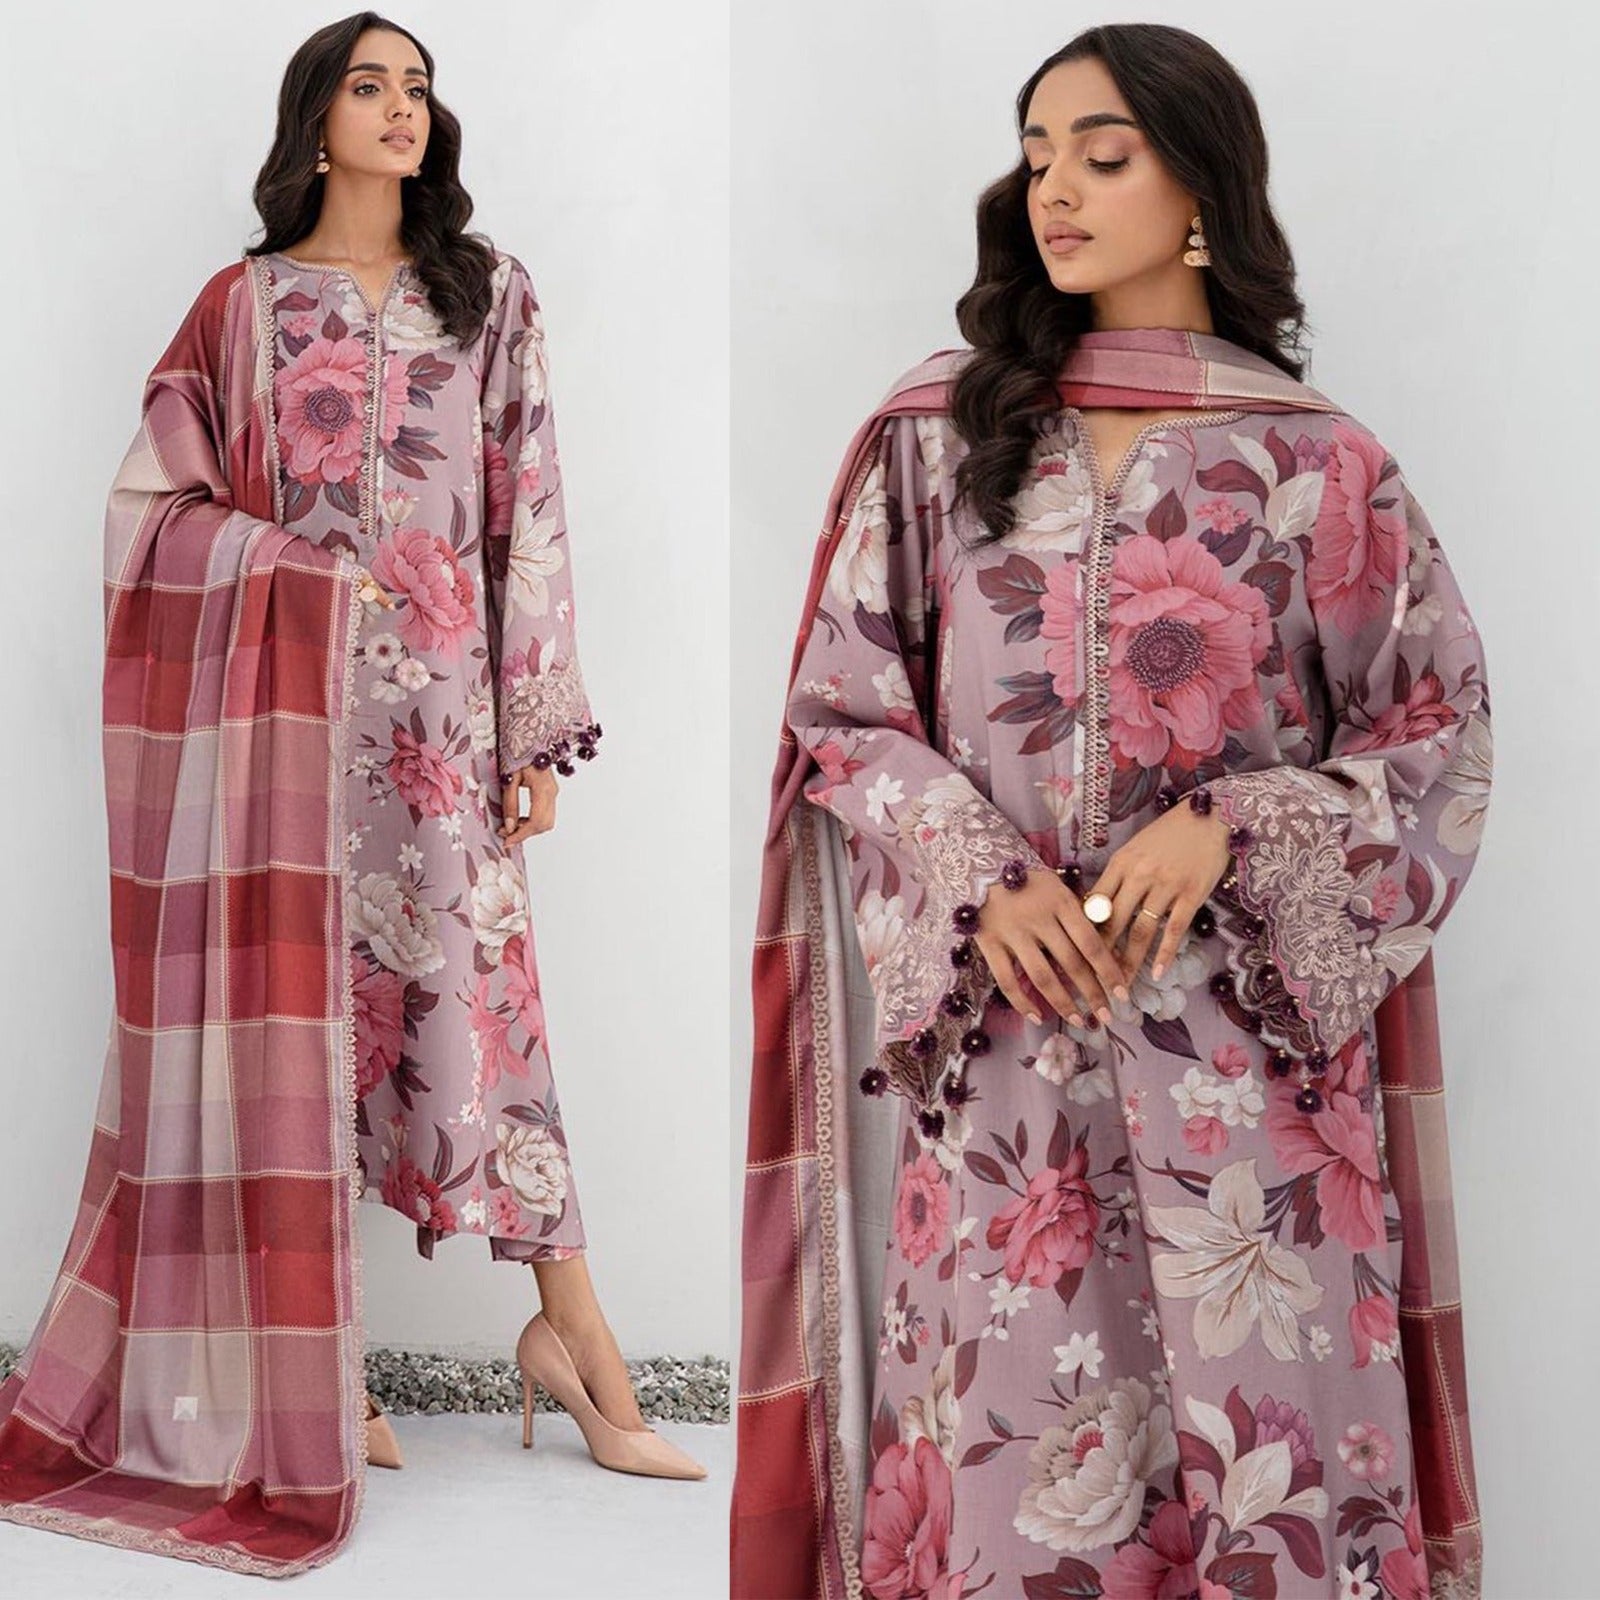 BAROQUE - 3PC Lawn Printed Shirt With Voile Printed Dupatta-764